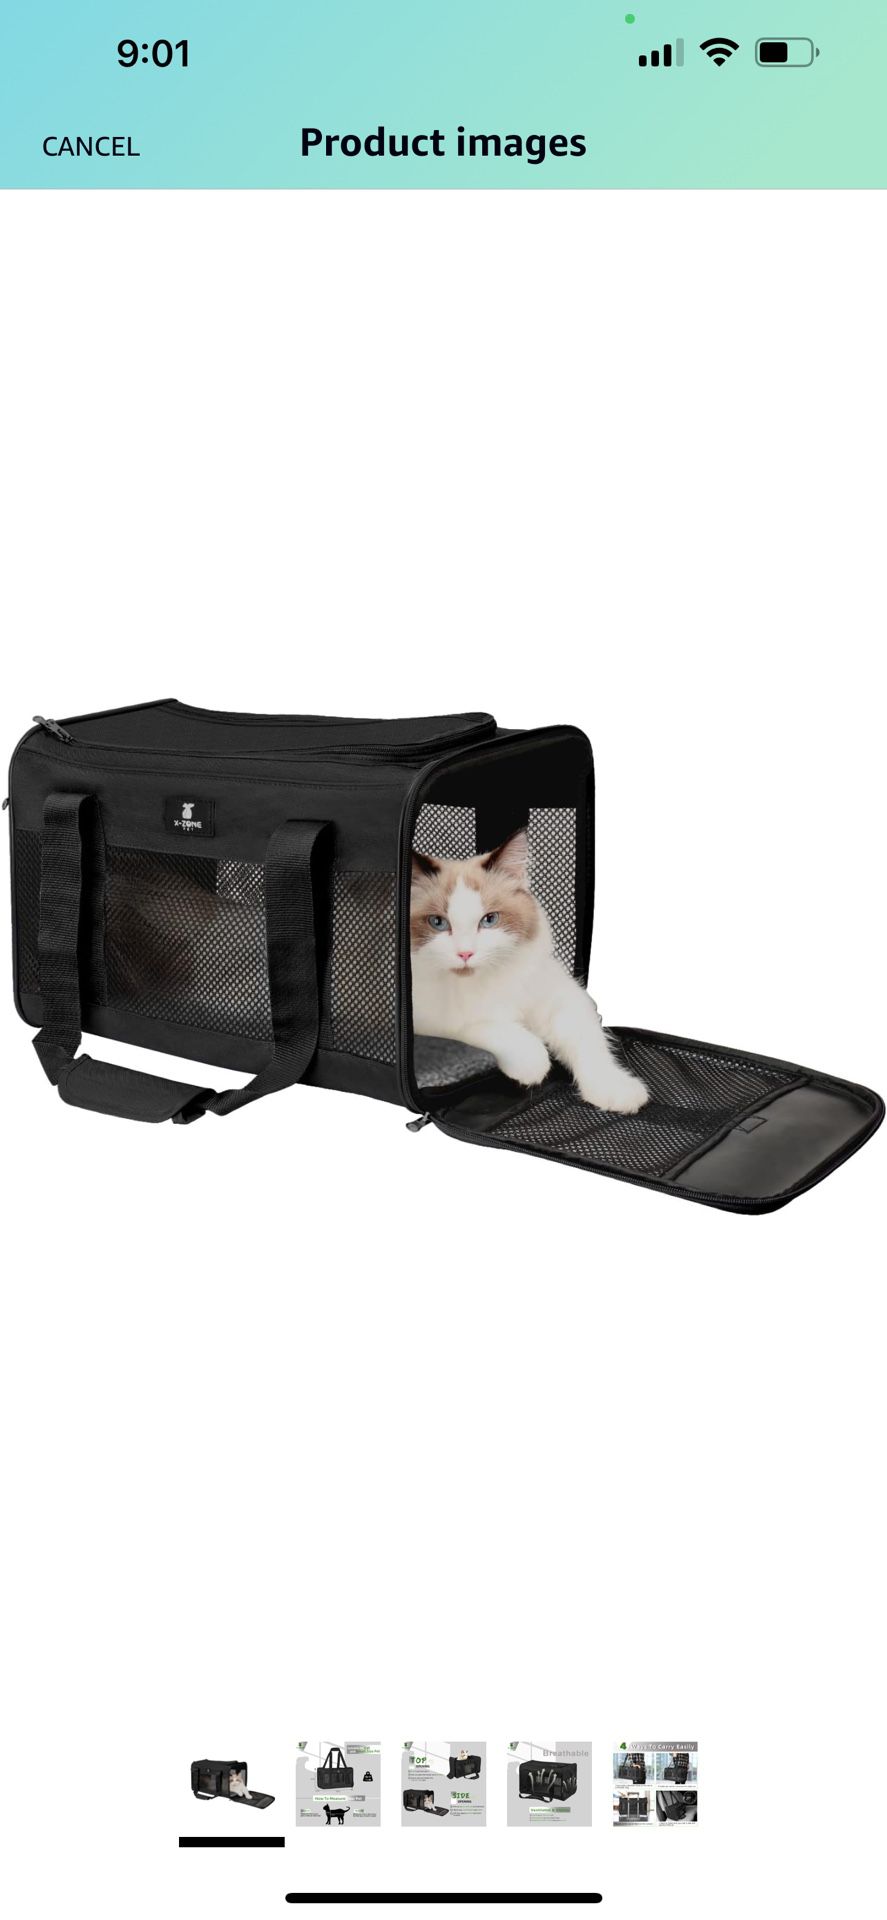 X-ZONE PET Cat Carrier Pet Carrier Portable Kitten Carrier for Small Medium Cats Under 25 Lbs,Cat Carrying Case with Removable Fleece Pad,Airline Appr